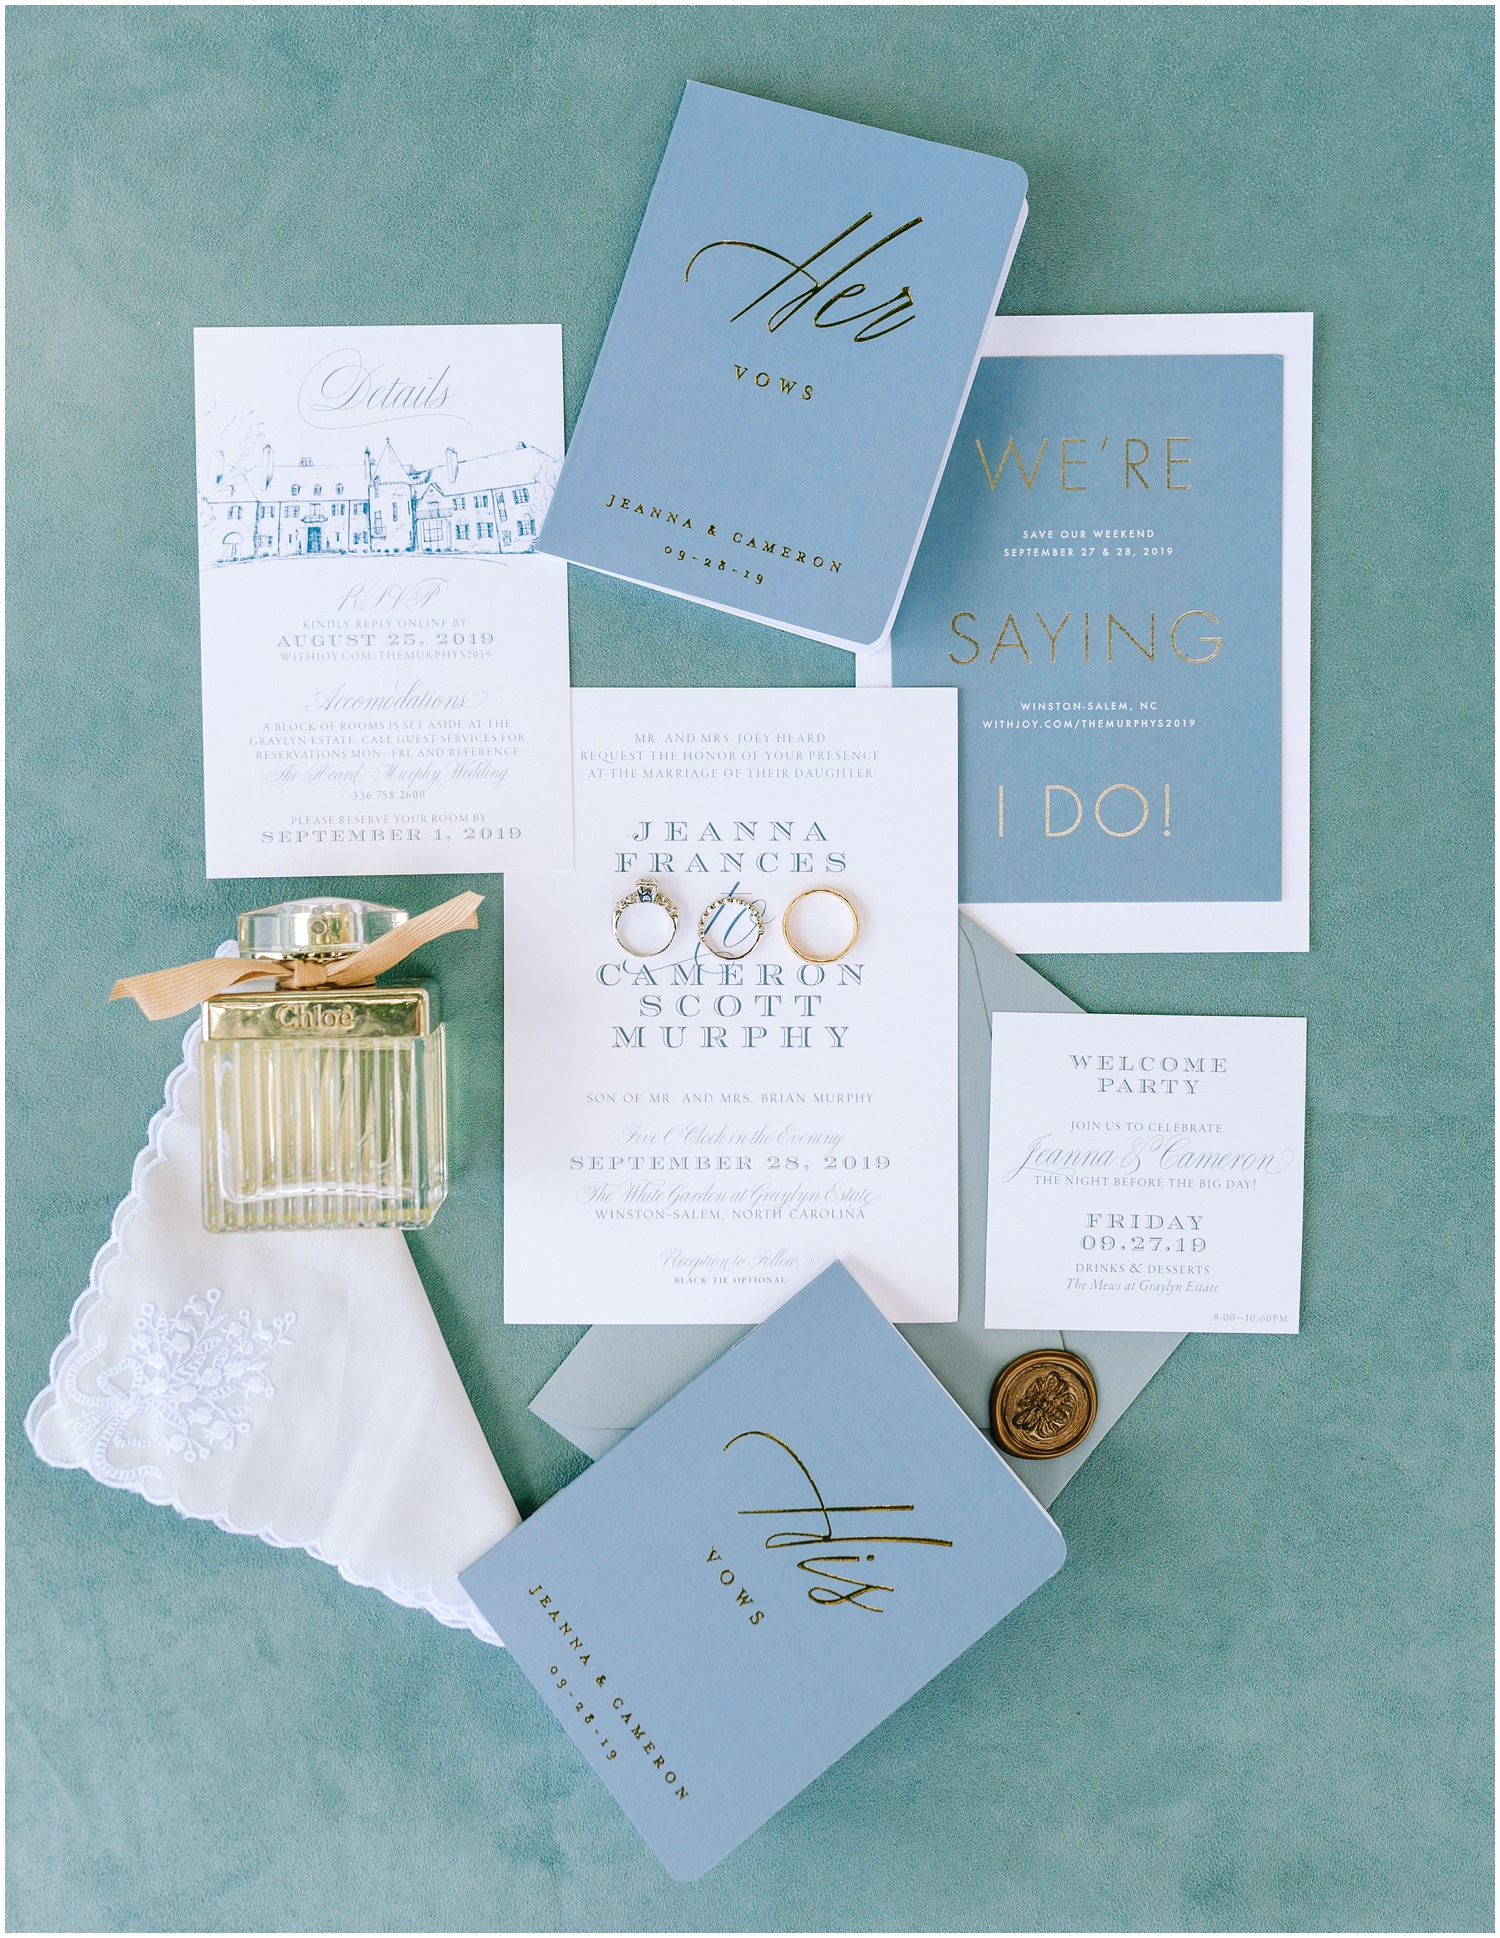 Graylyn Estate wedding invitation suite with blue, gold, and ivory details